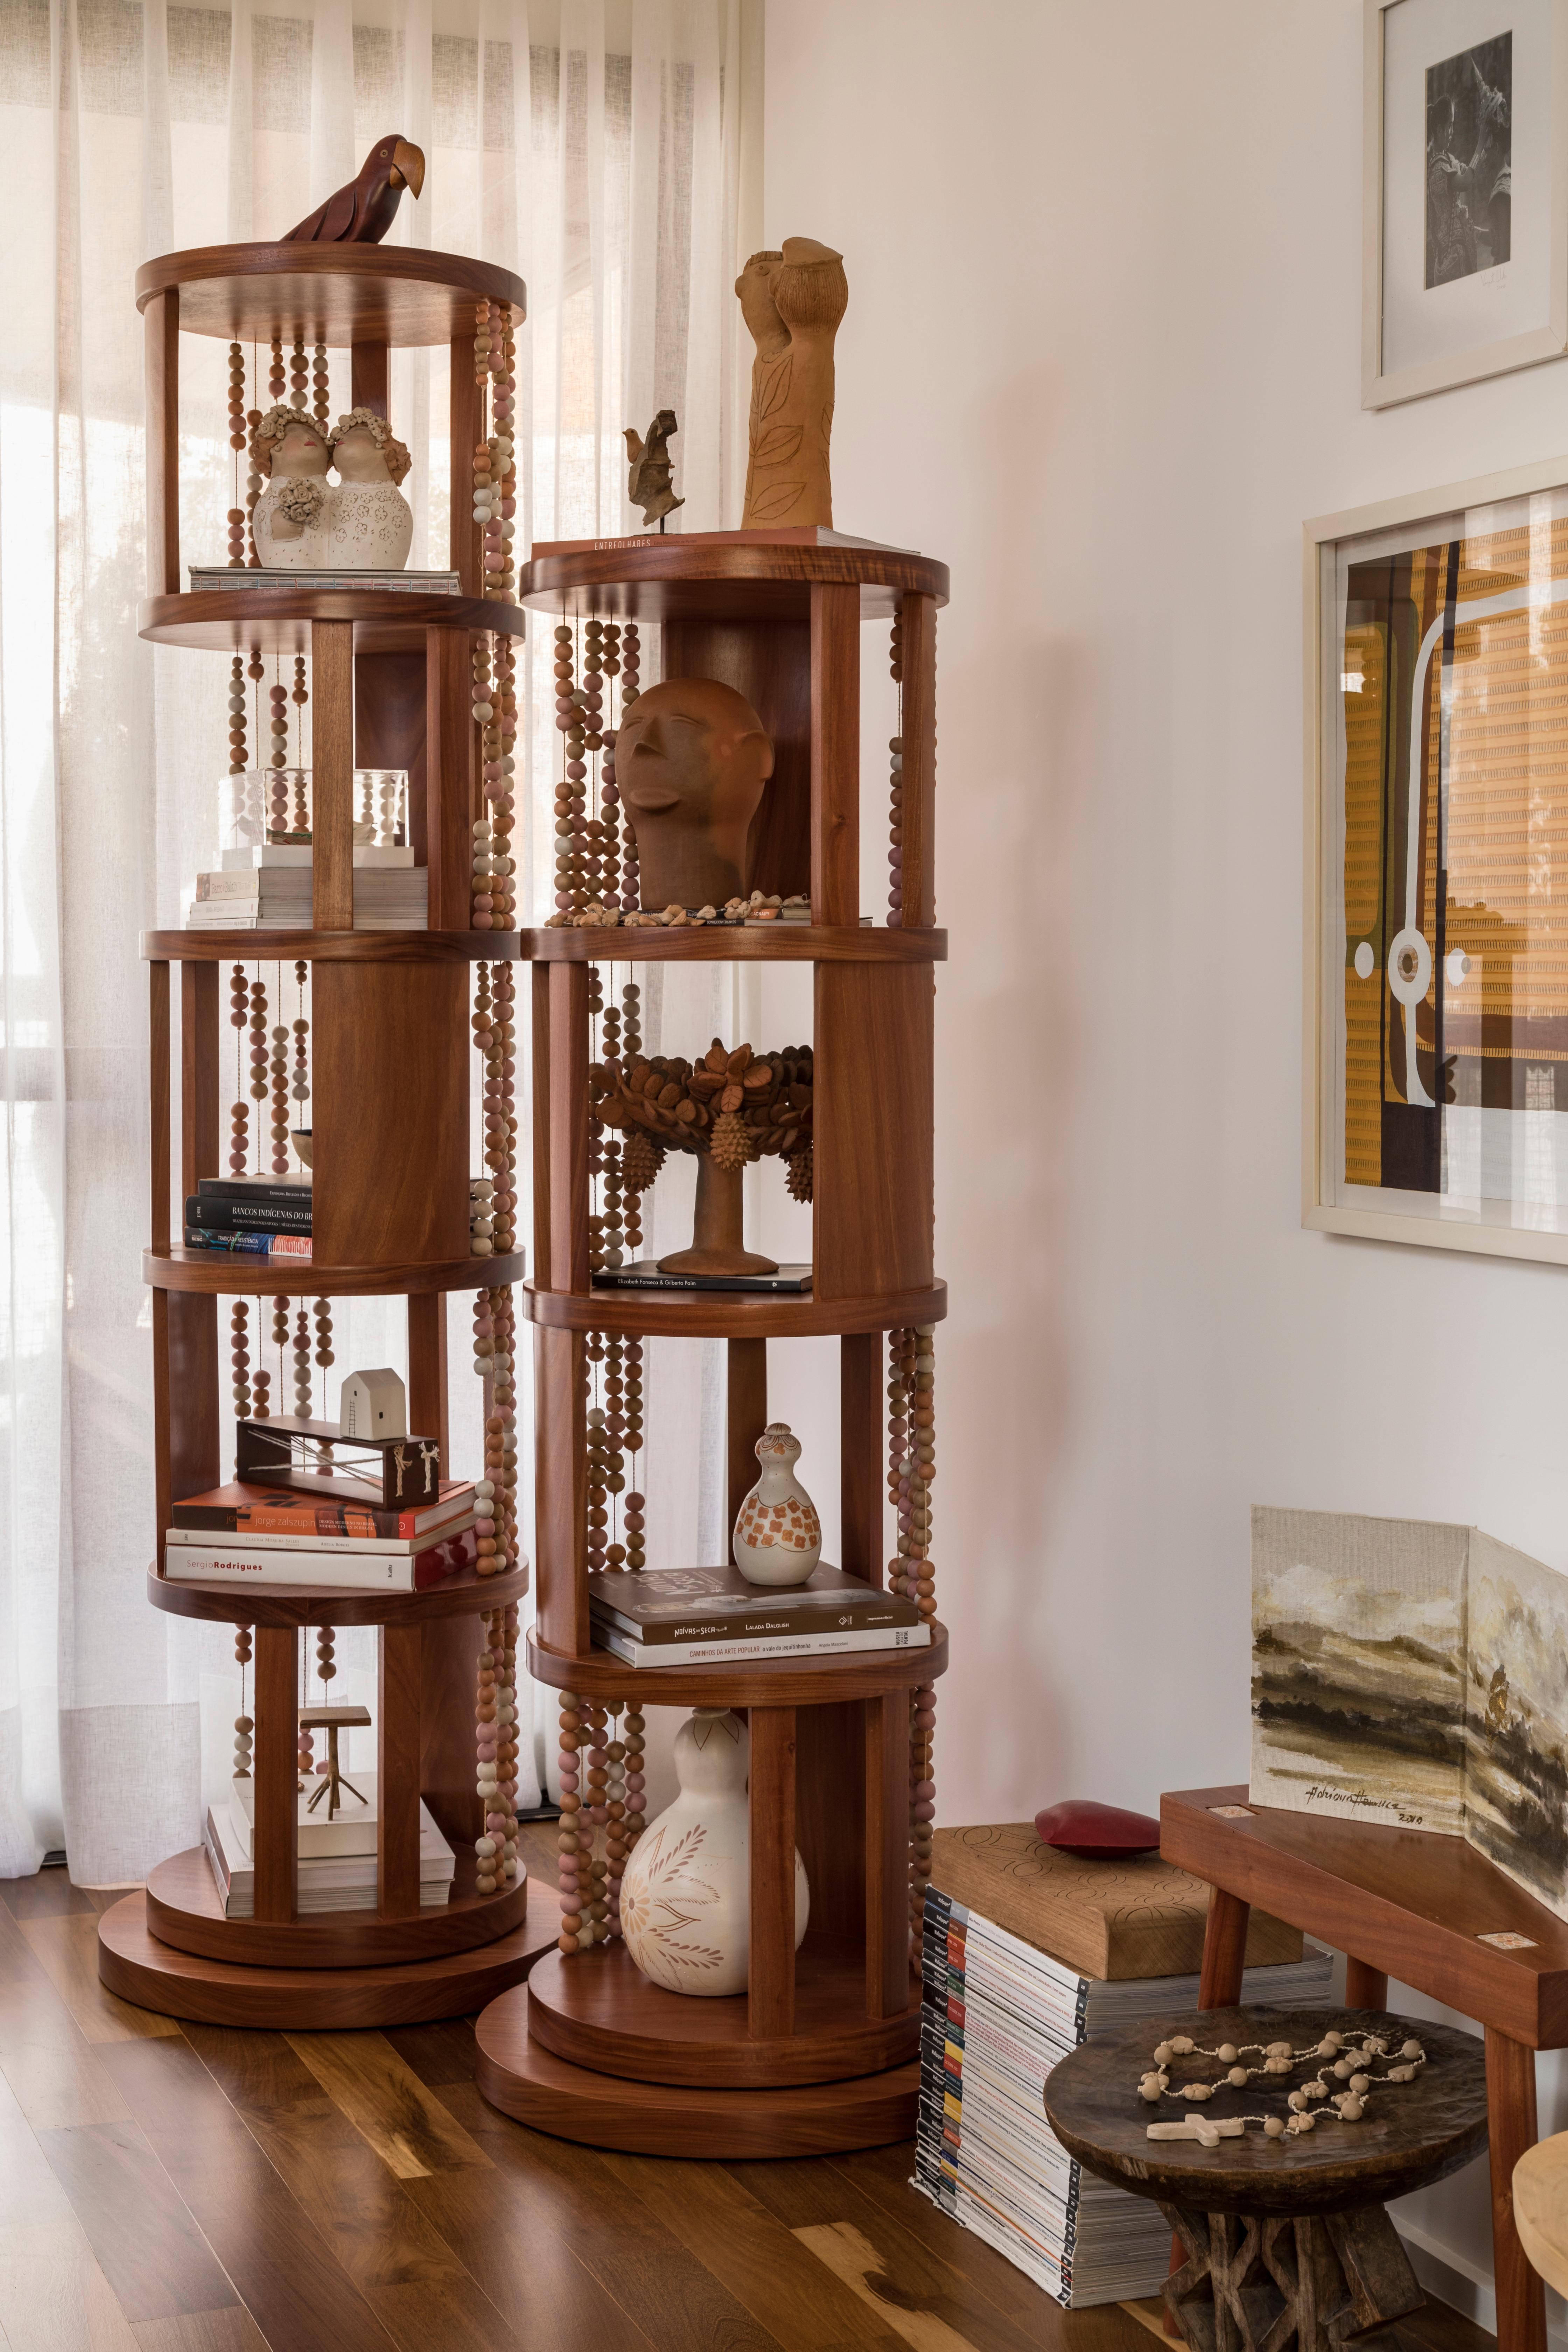 Brazilian Contas Round Swivel Bookcase in Cabreuva wood - With artisans from Brazil